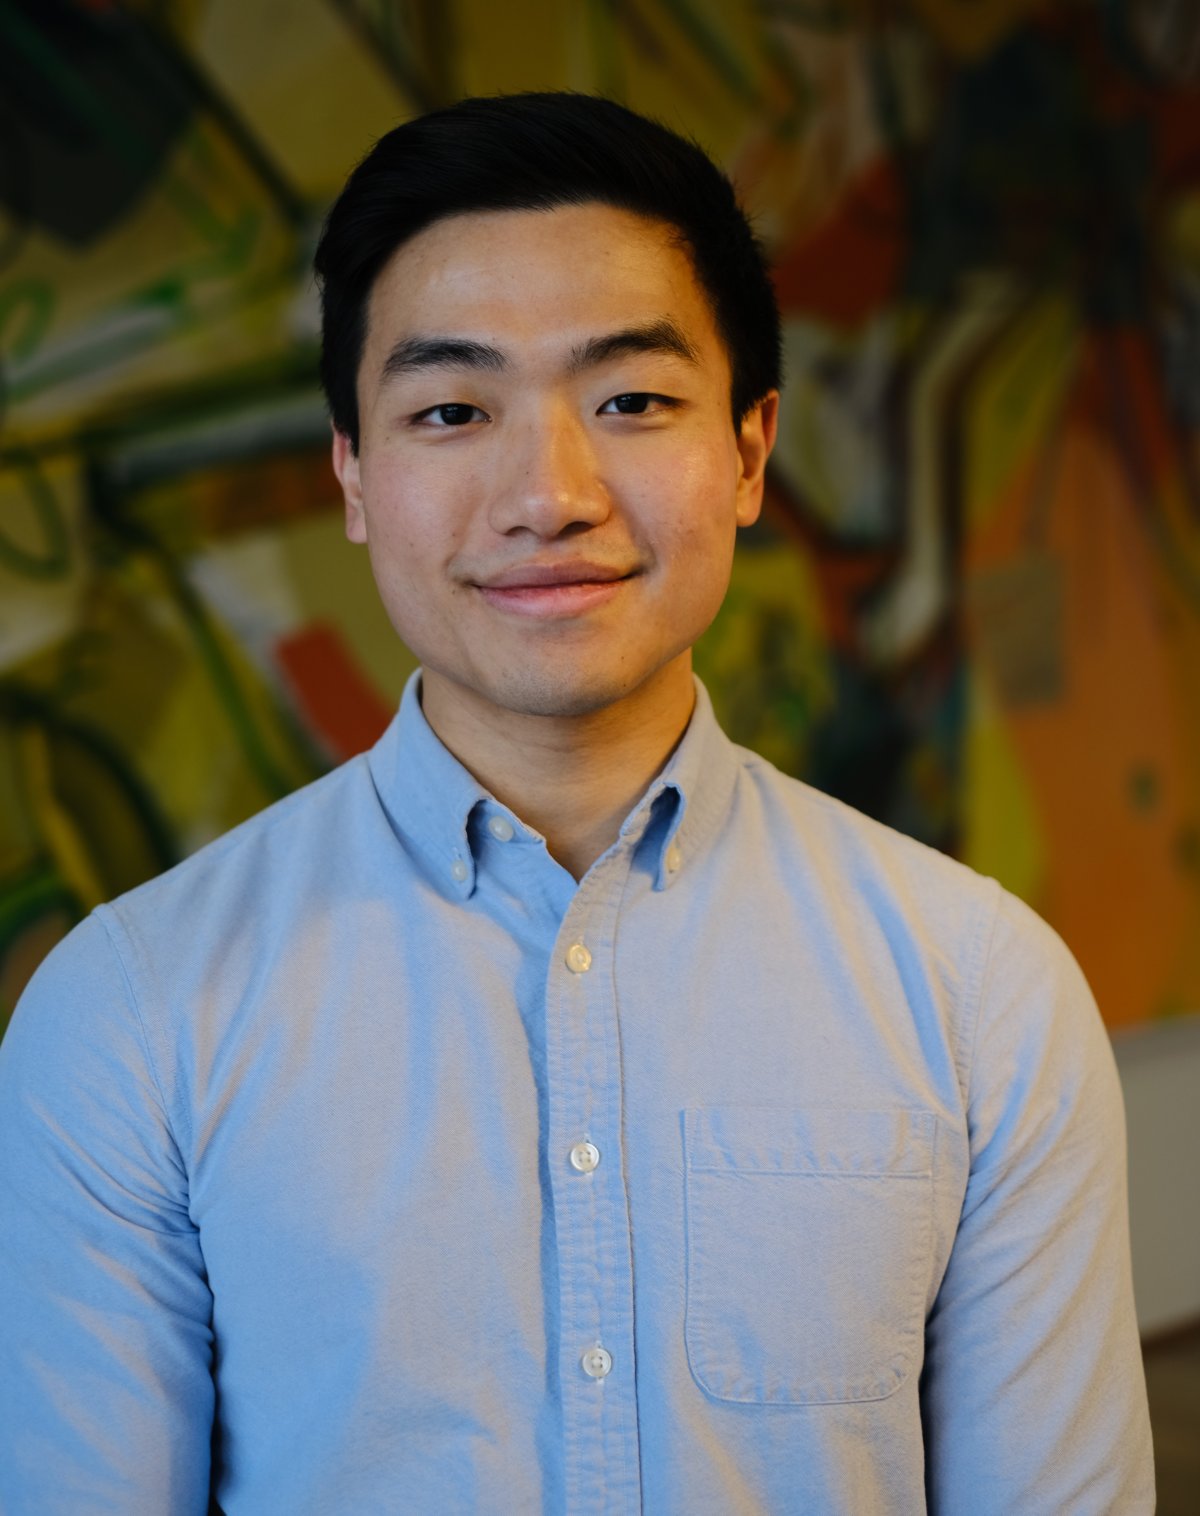 Western University medical student, Mike Ding, has signed on to Belleville's doctor recruitment program.